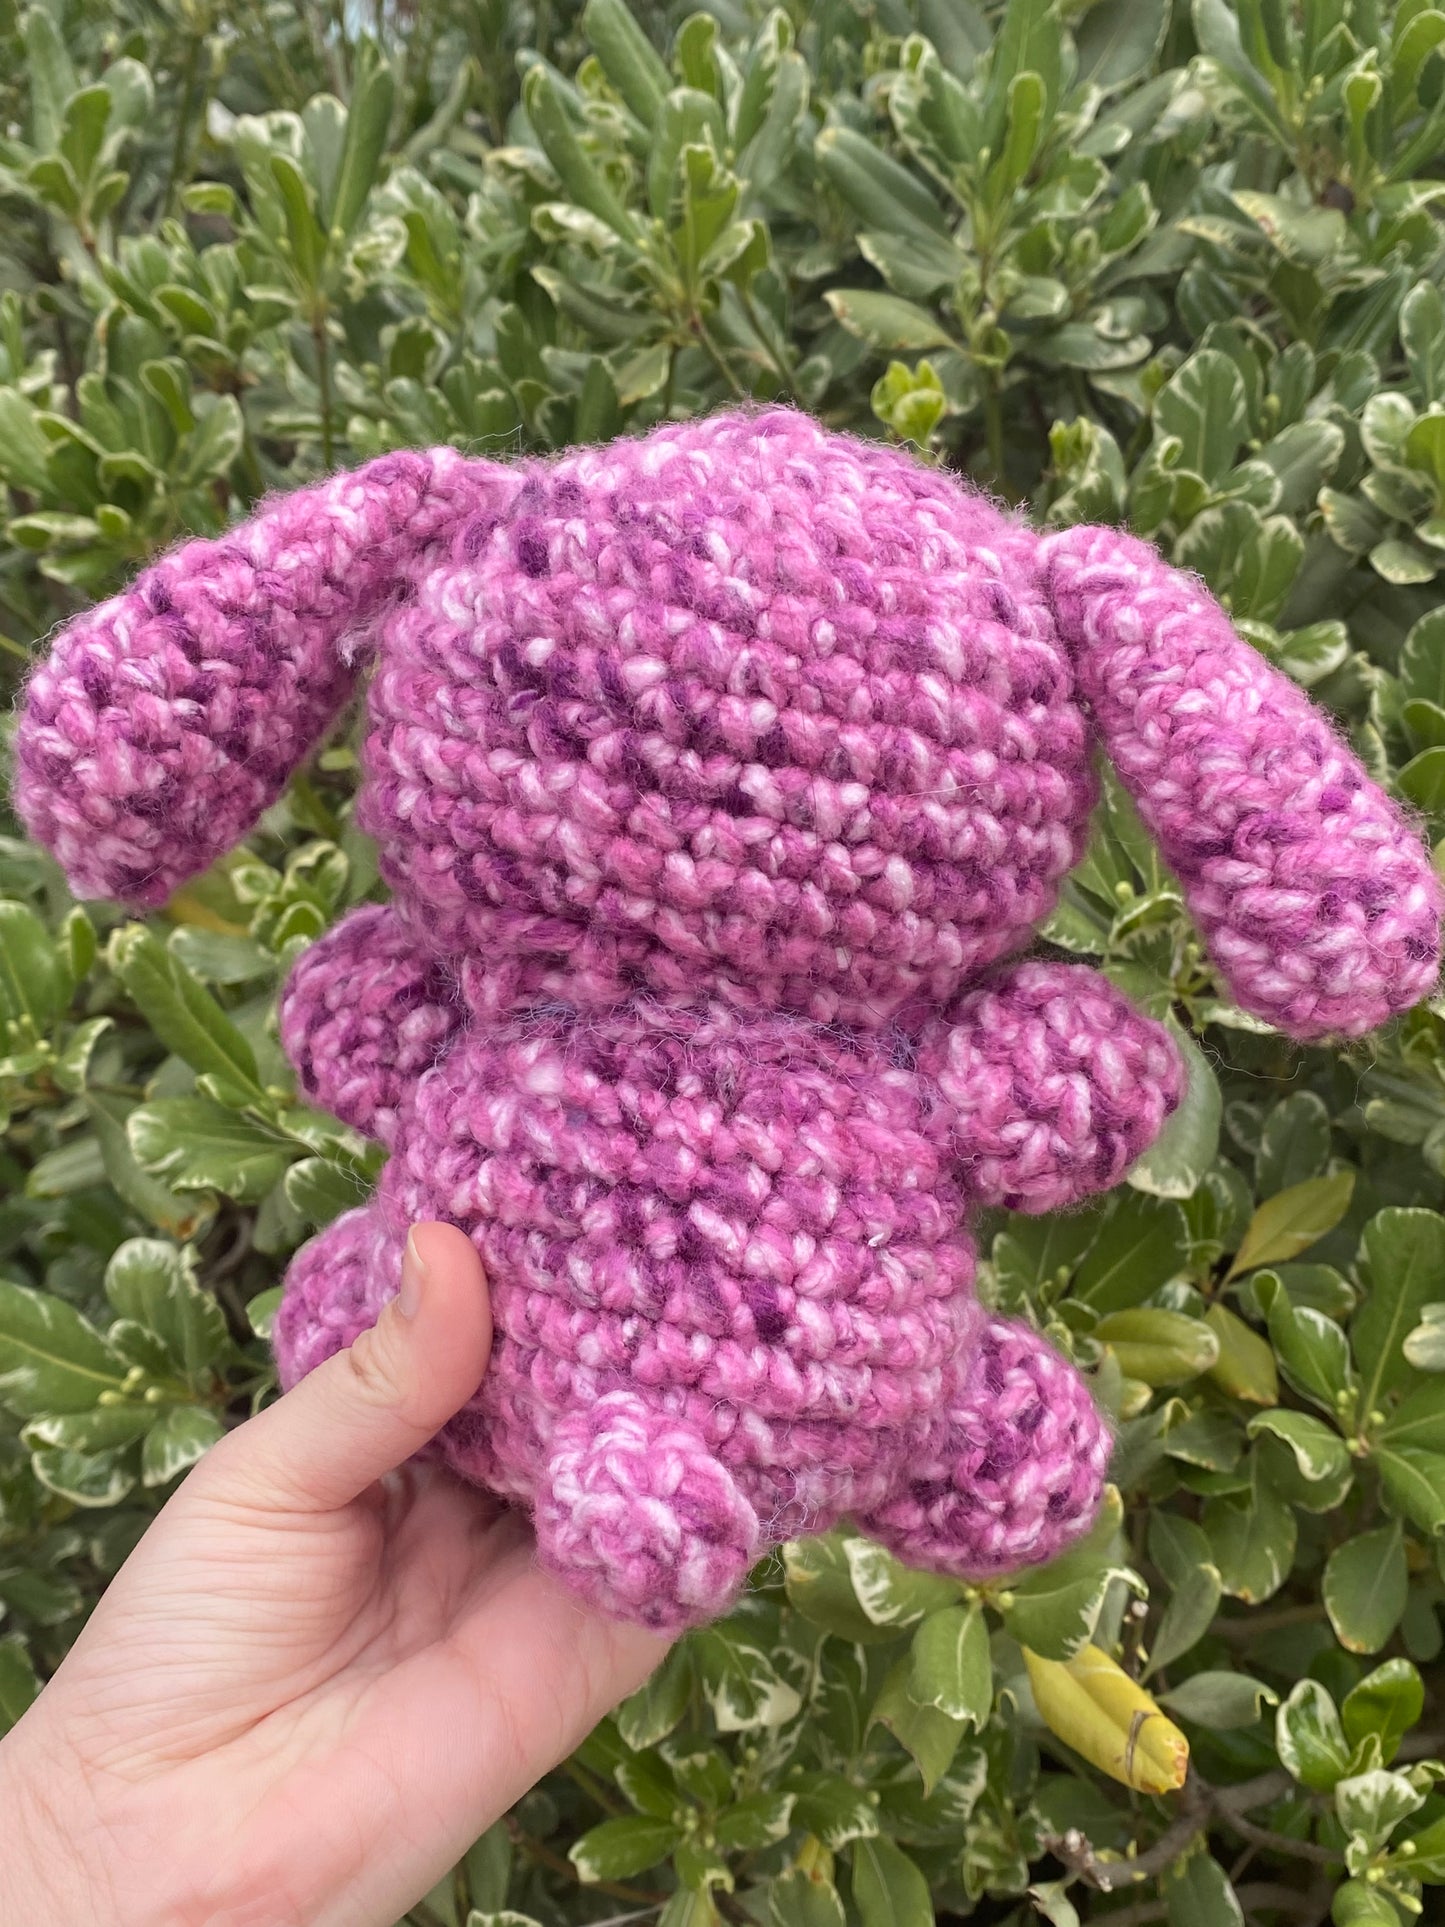 Adorable Crochet Handmade Bunny Plushie / Pick One Of Two Colors! / Made To Order